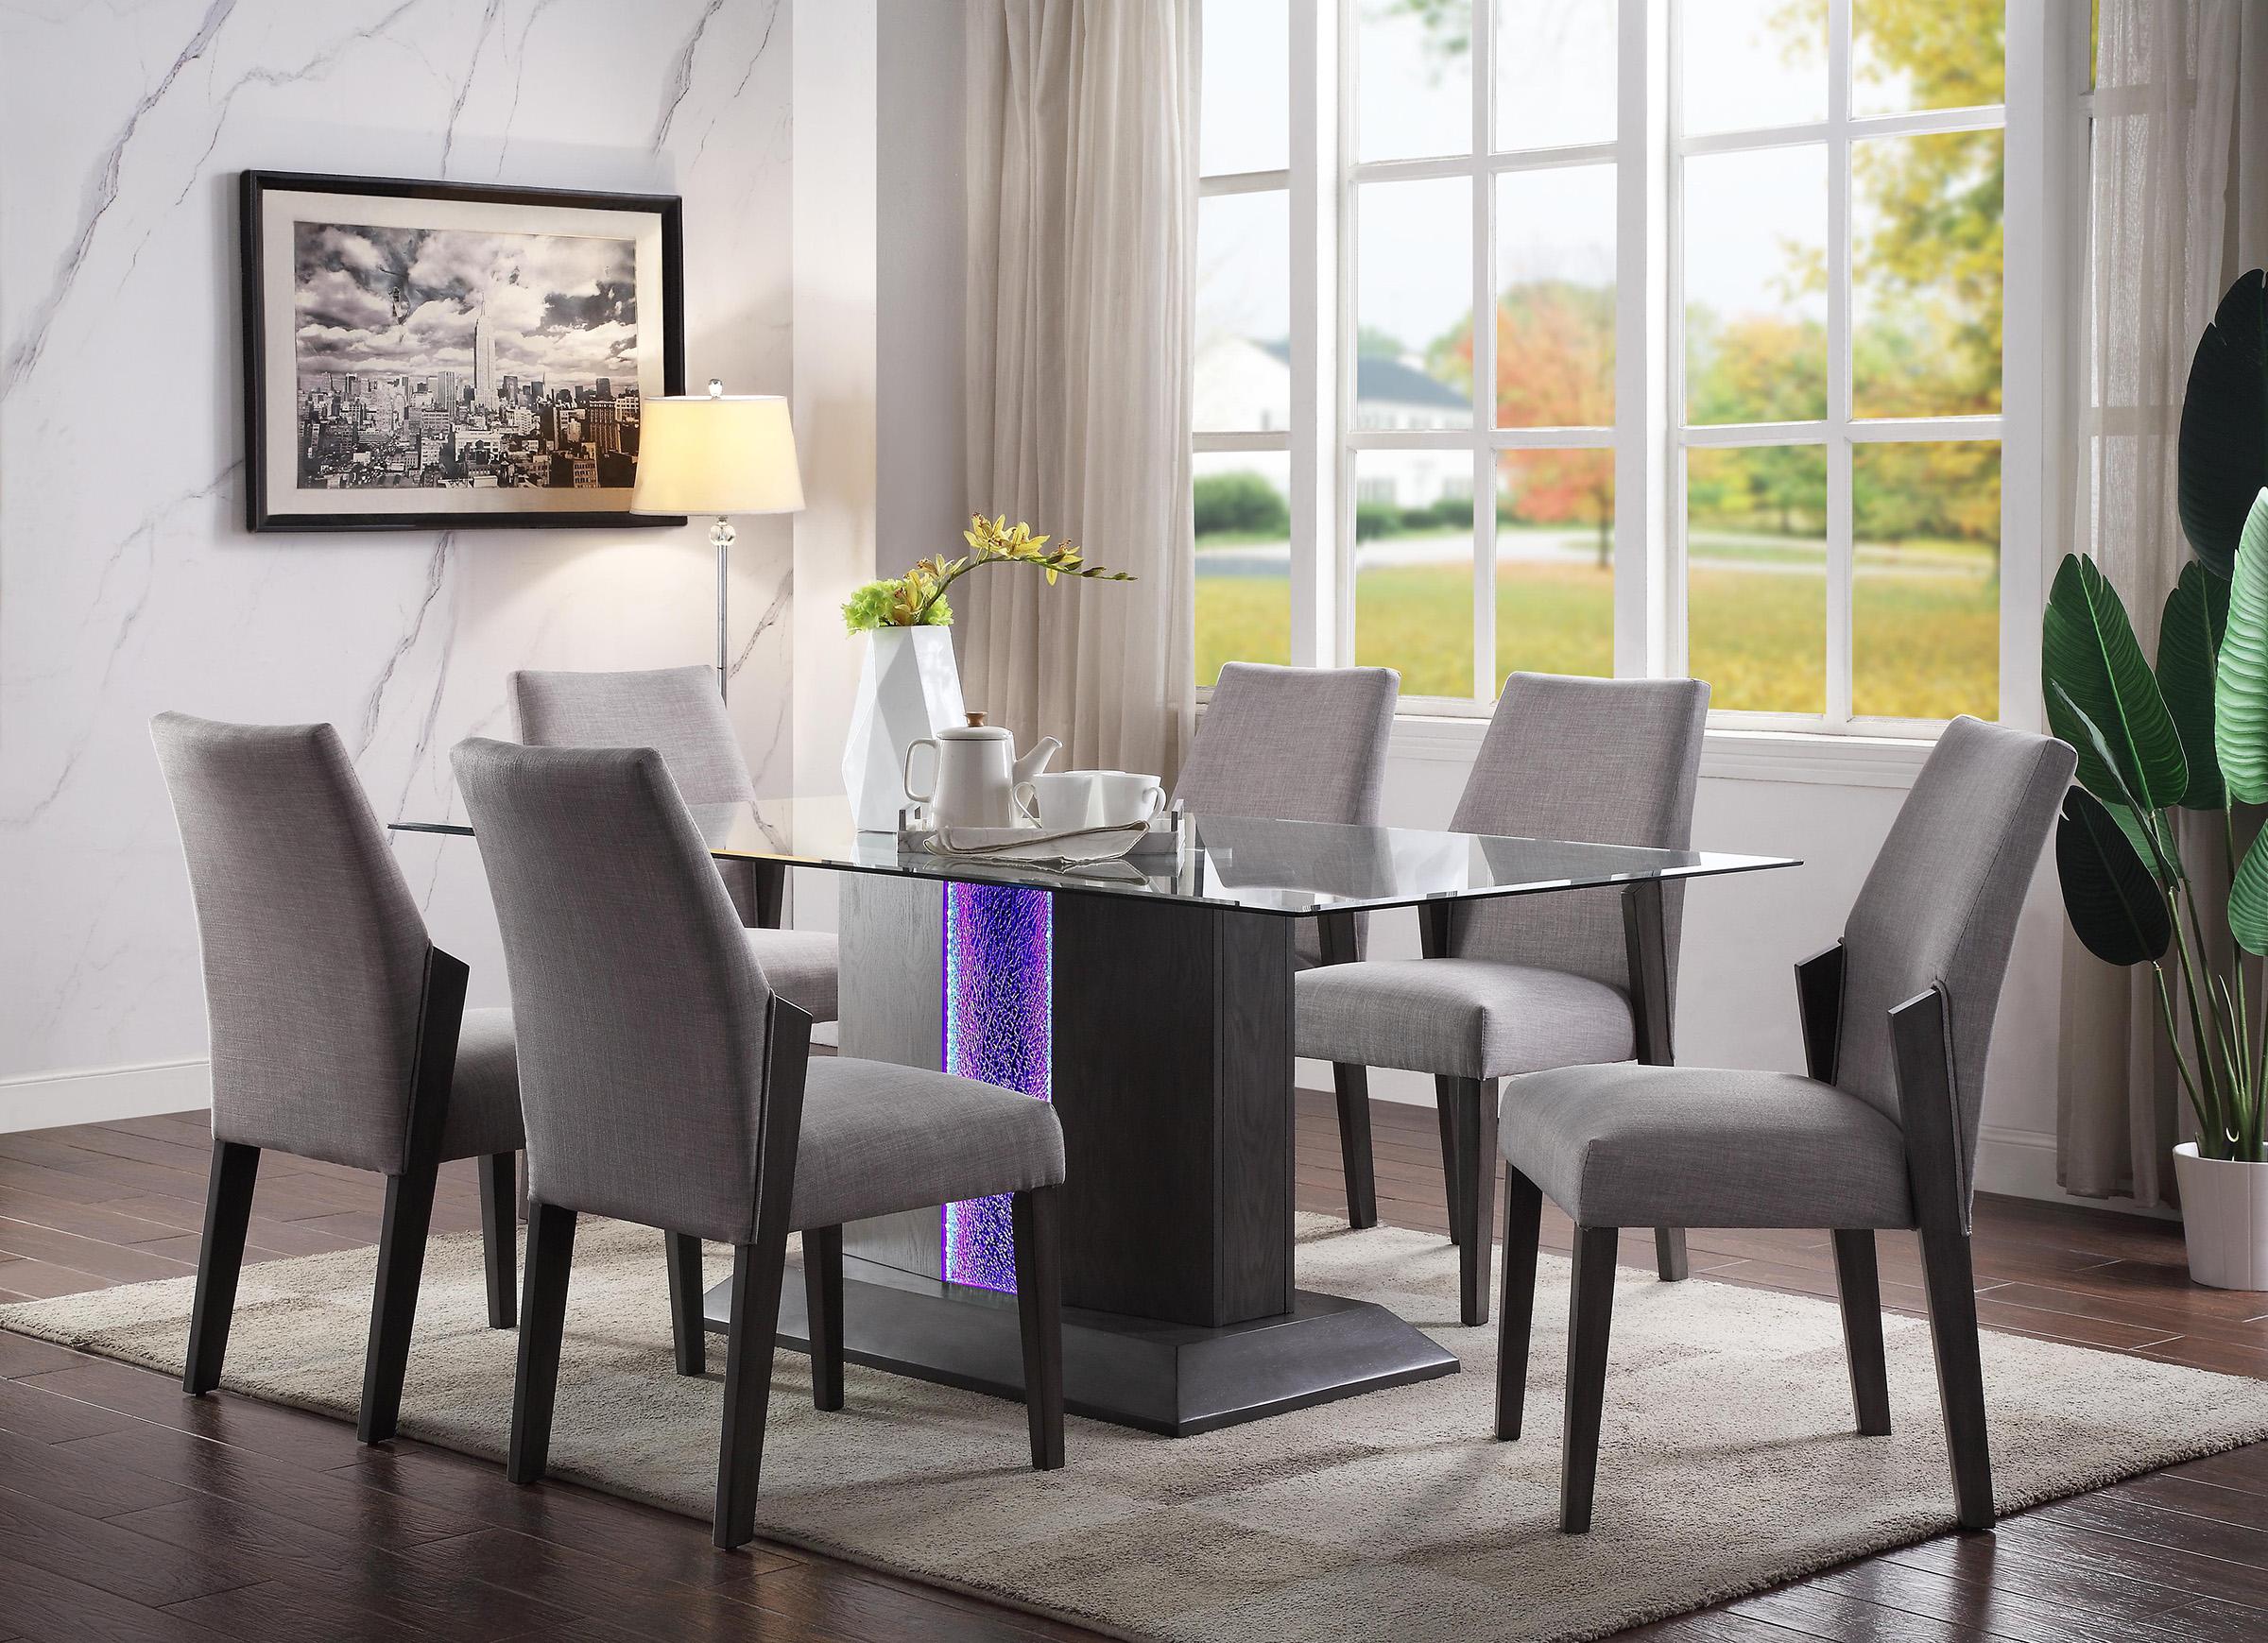 Contemporary, Modern Dining Table Set Belay 72290-Set-7 in Oak, Clear, Gray Fabric